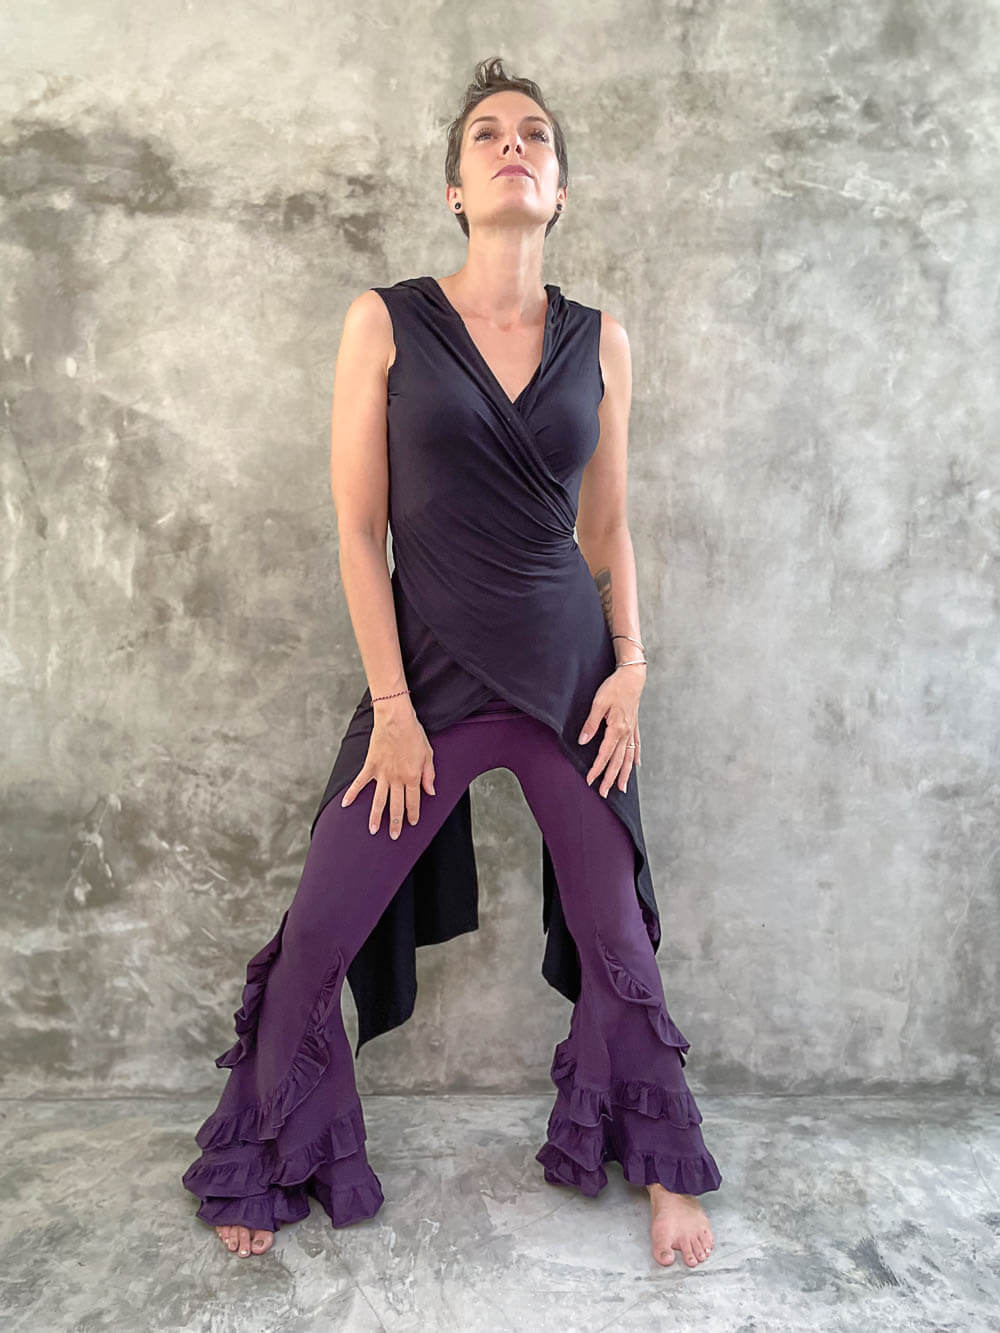 Flare Ruffle Pants in Plum, Women's Eco-Friendly Clothing